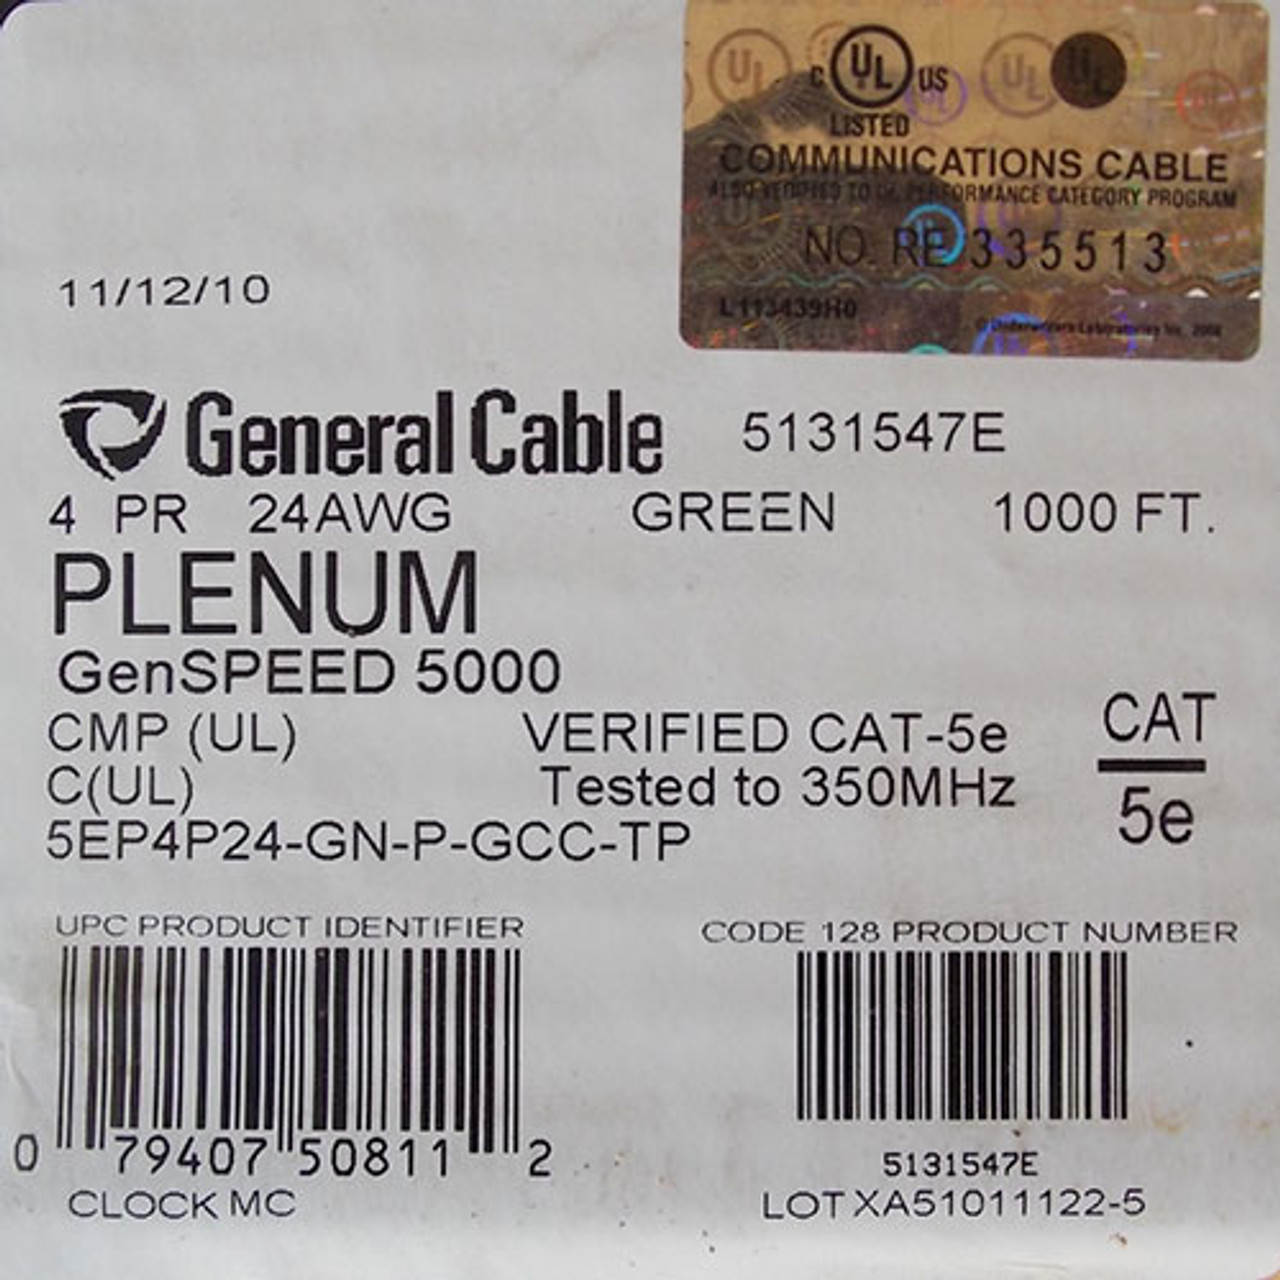 General Cable 5131547E 1000' CAT5E 4PR 24AWG Plenum GenSPEED5000 Cable - New